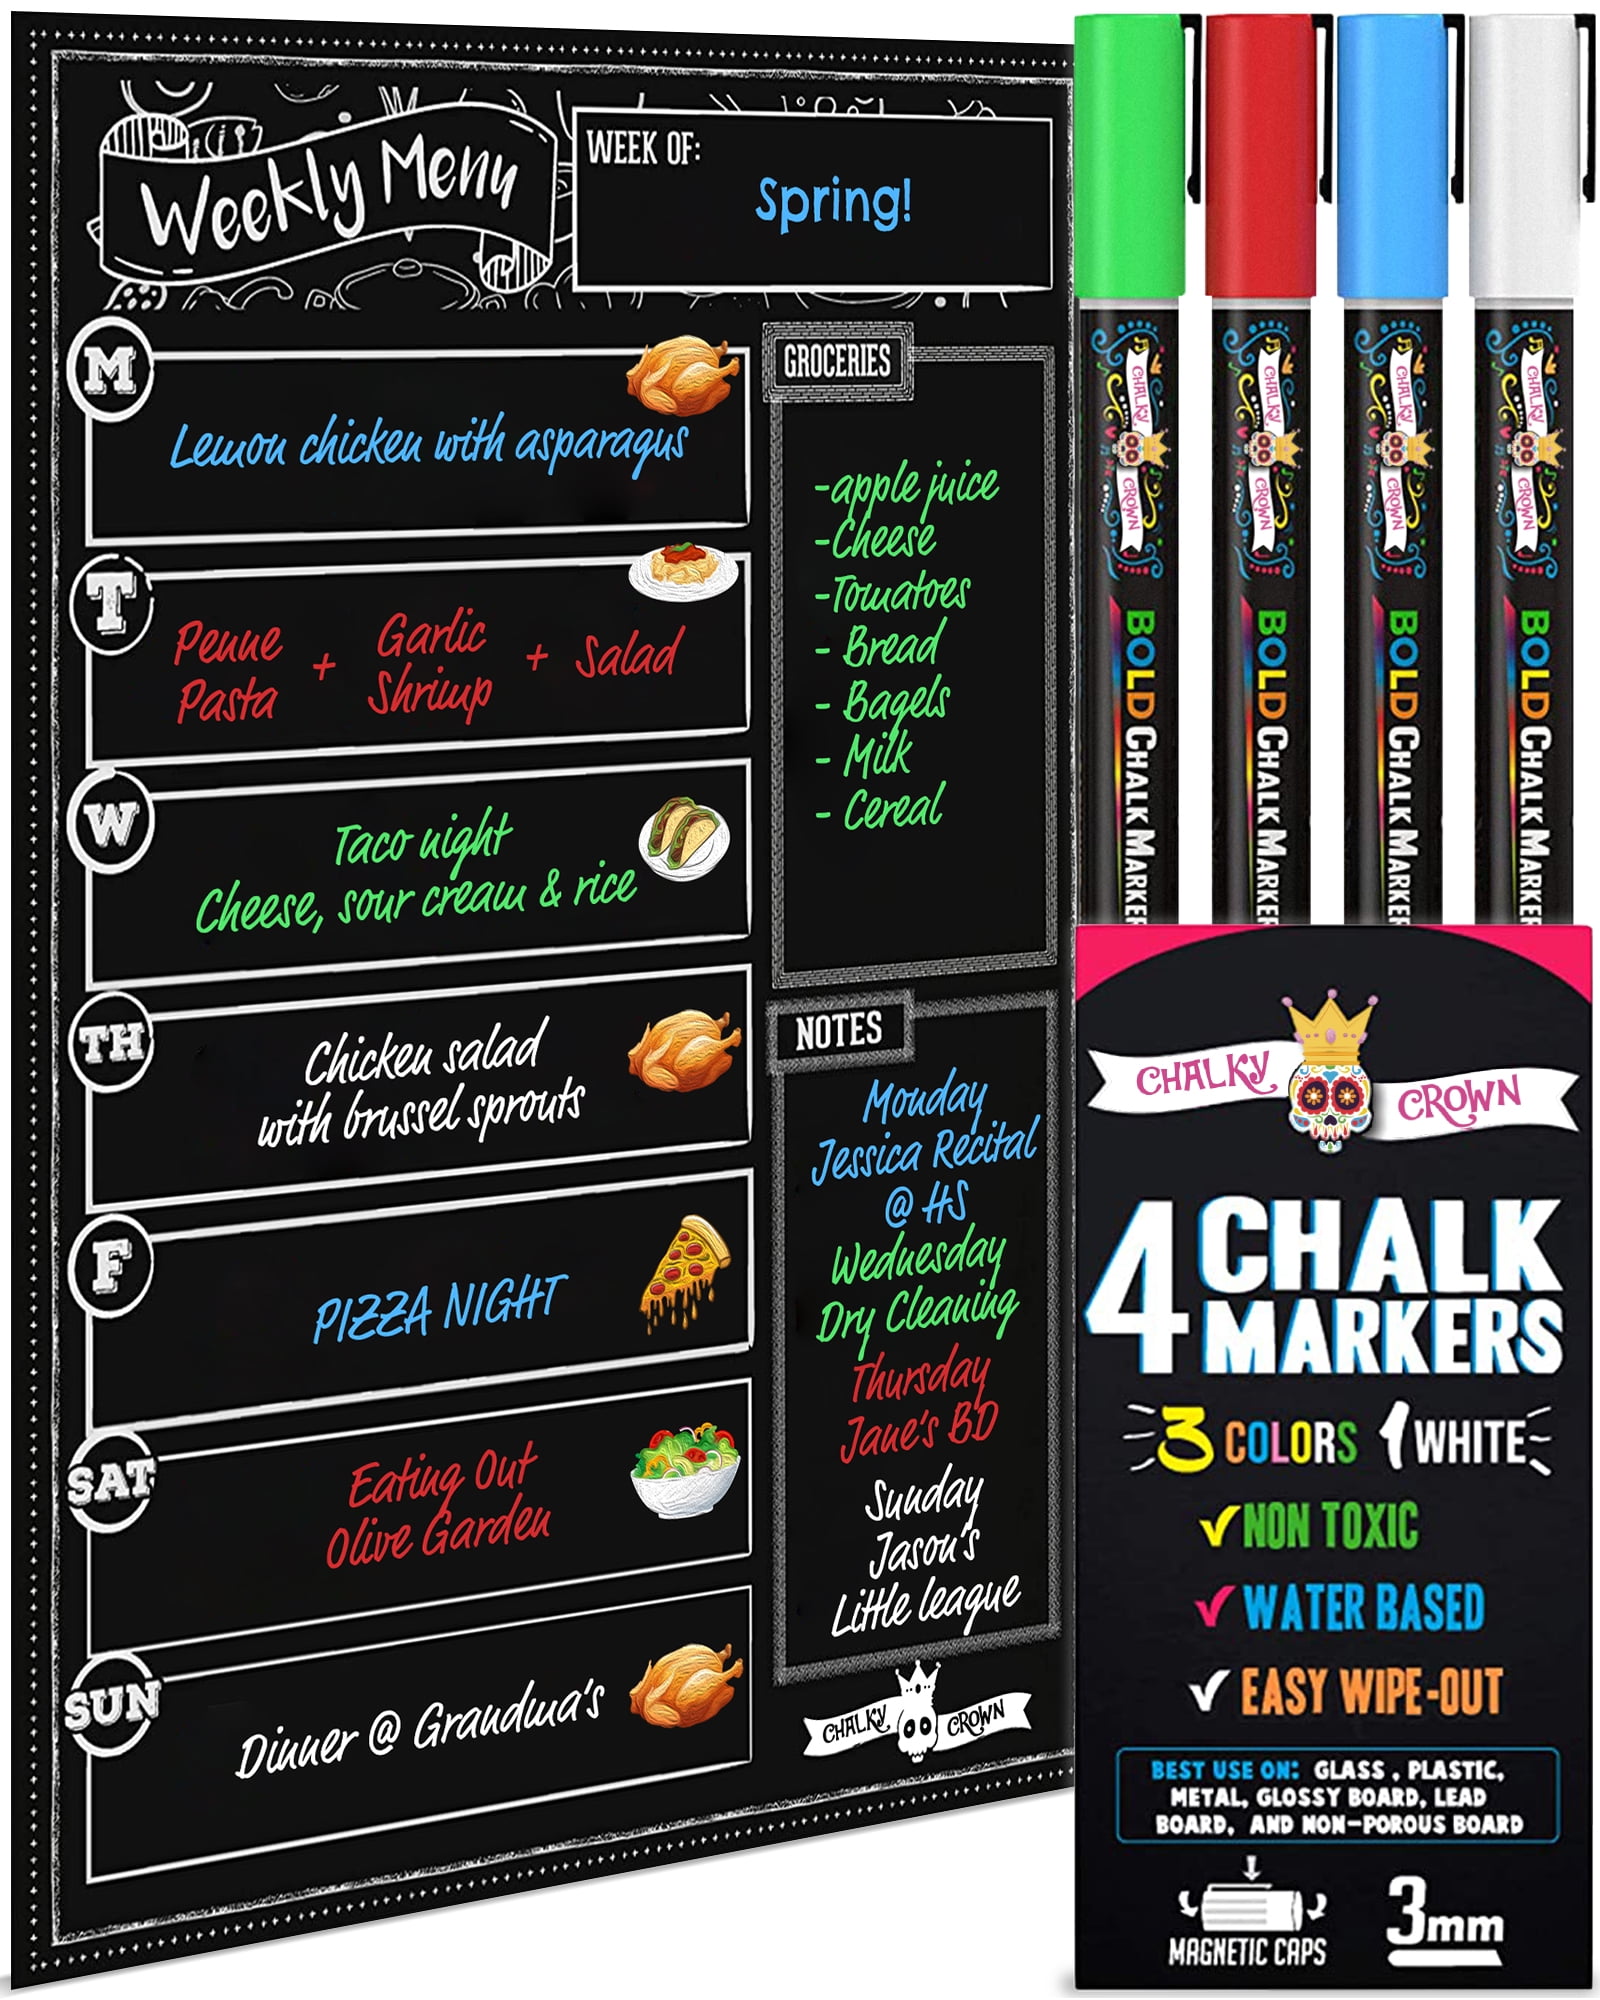 JJPRO Magnetic Menu Board for Fridge with Neon Bright Liquid Chalk Markers - Weekly Meal Planner with Grocery List and Notepad Chalkboard Set for